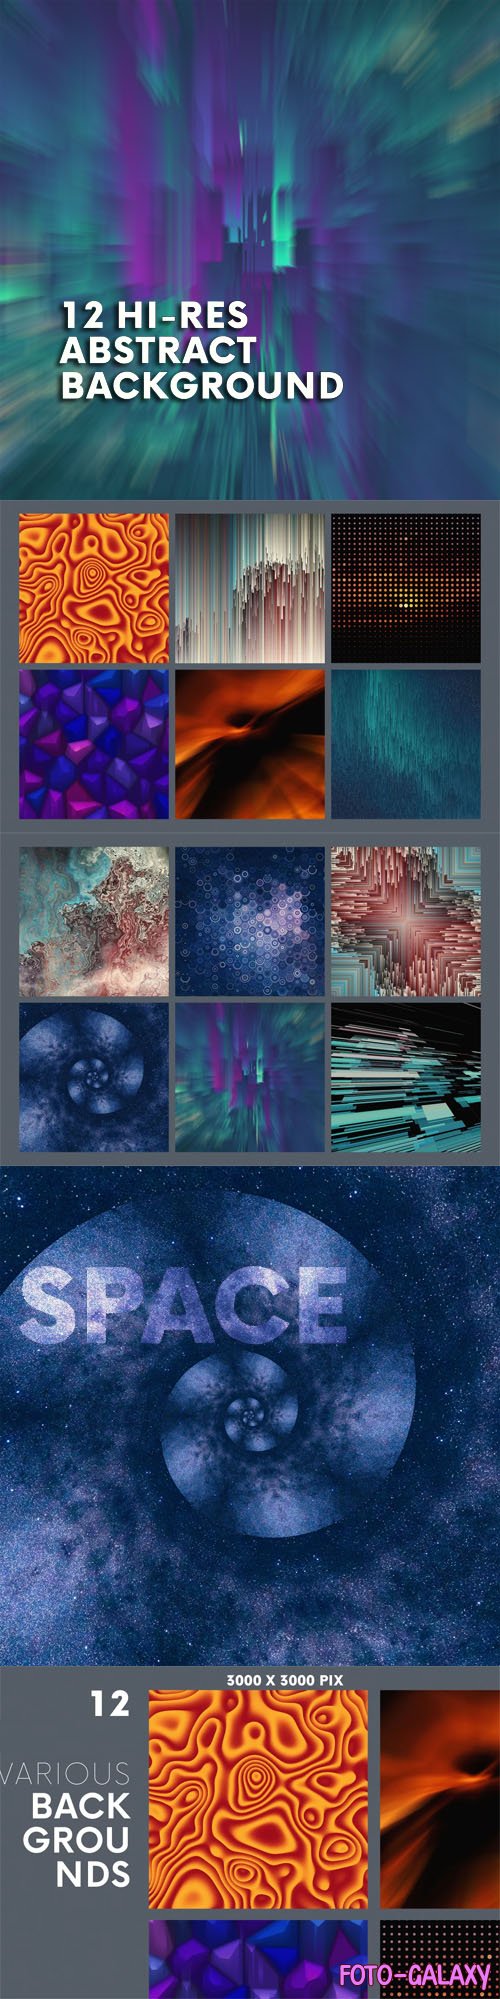 12 Hi-Res Abstract Overlays for Photoshop [Vol.2]